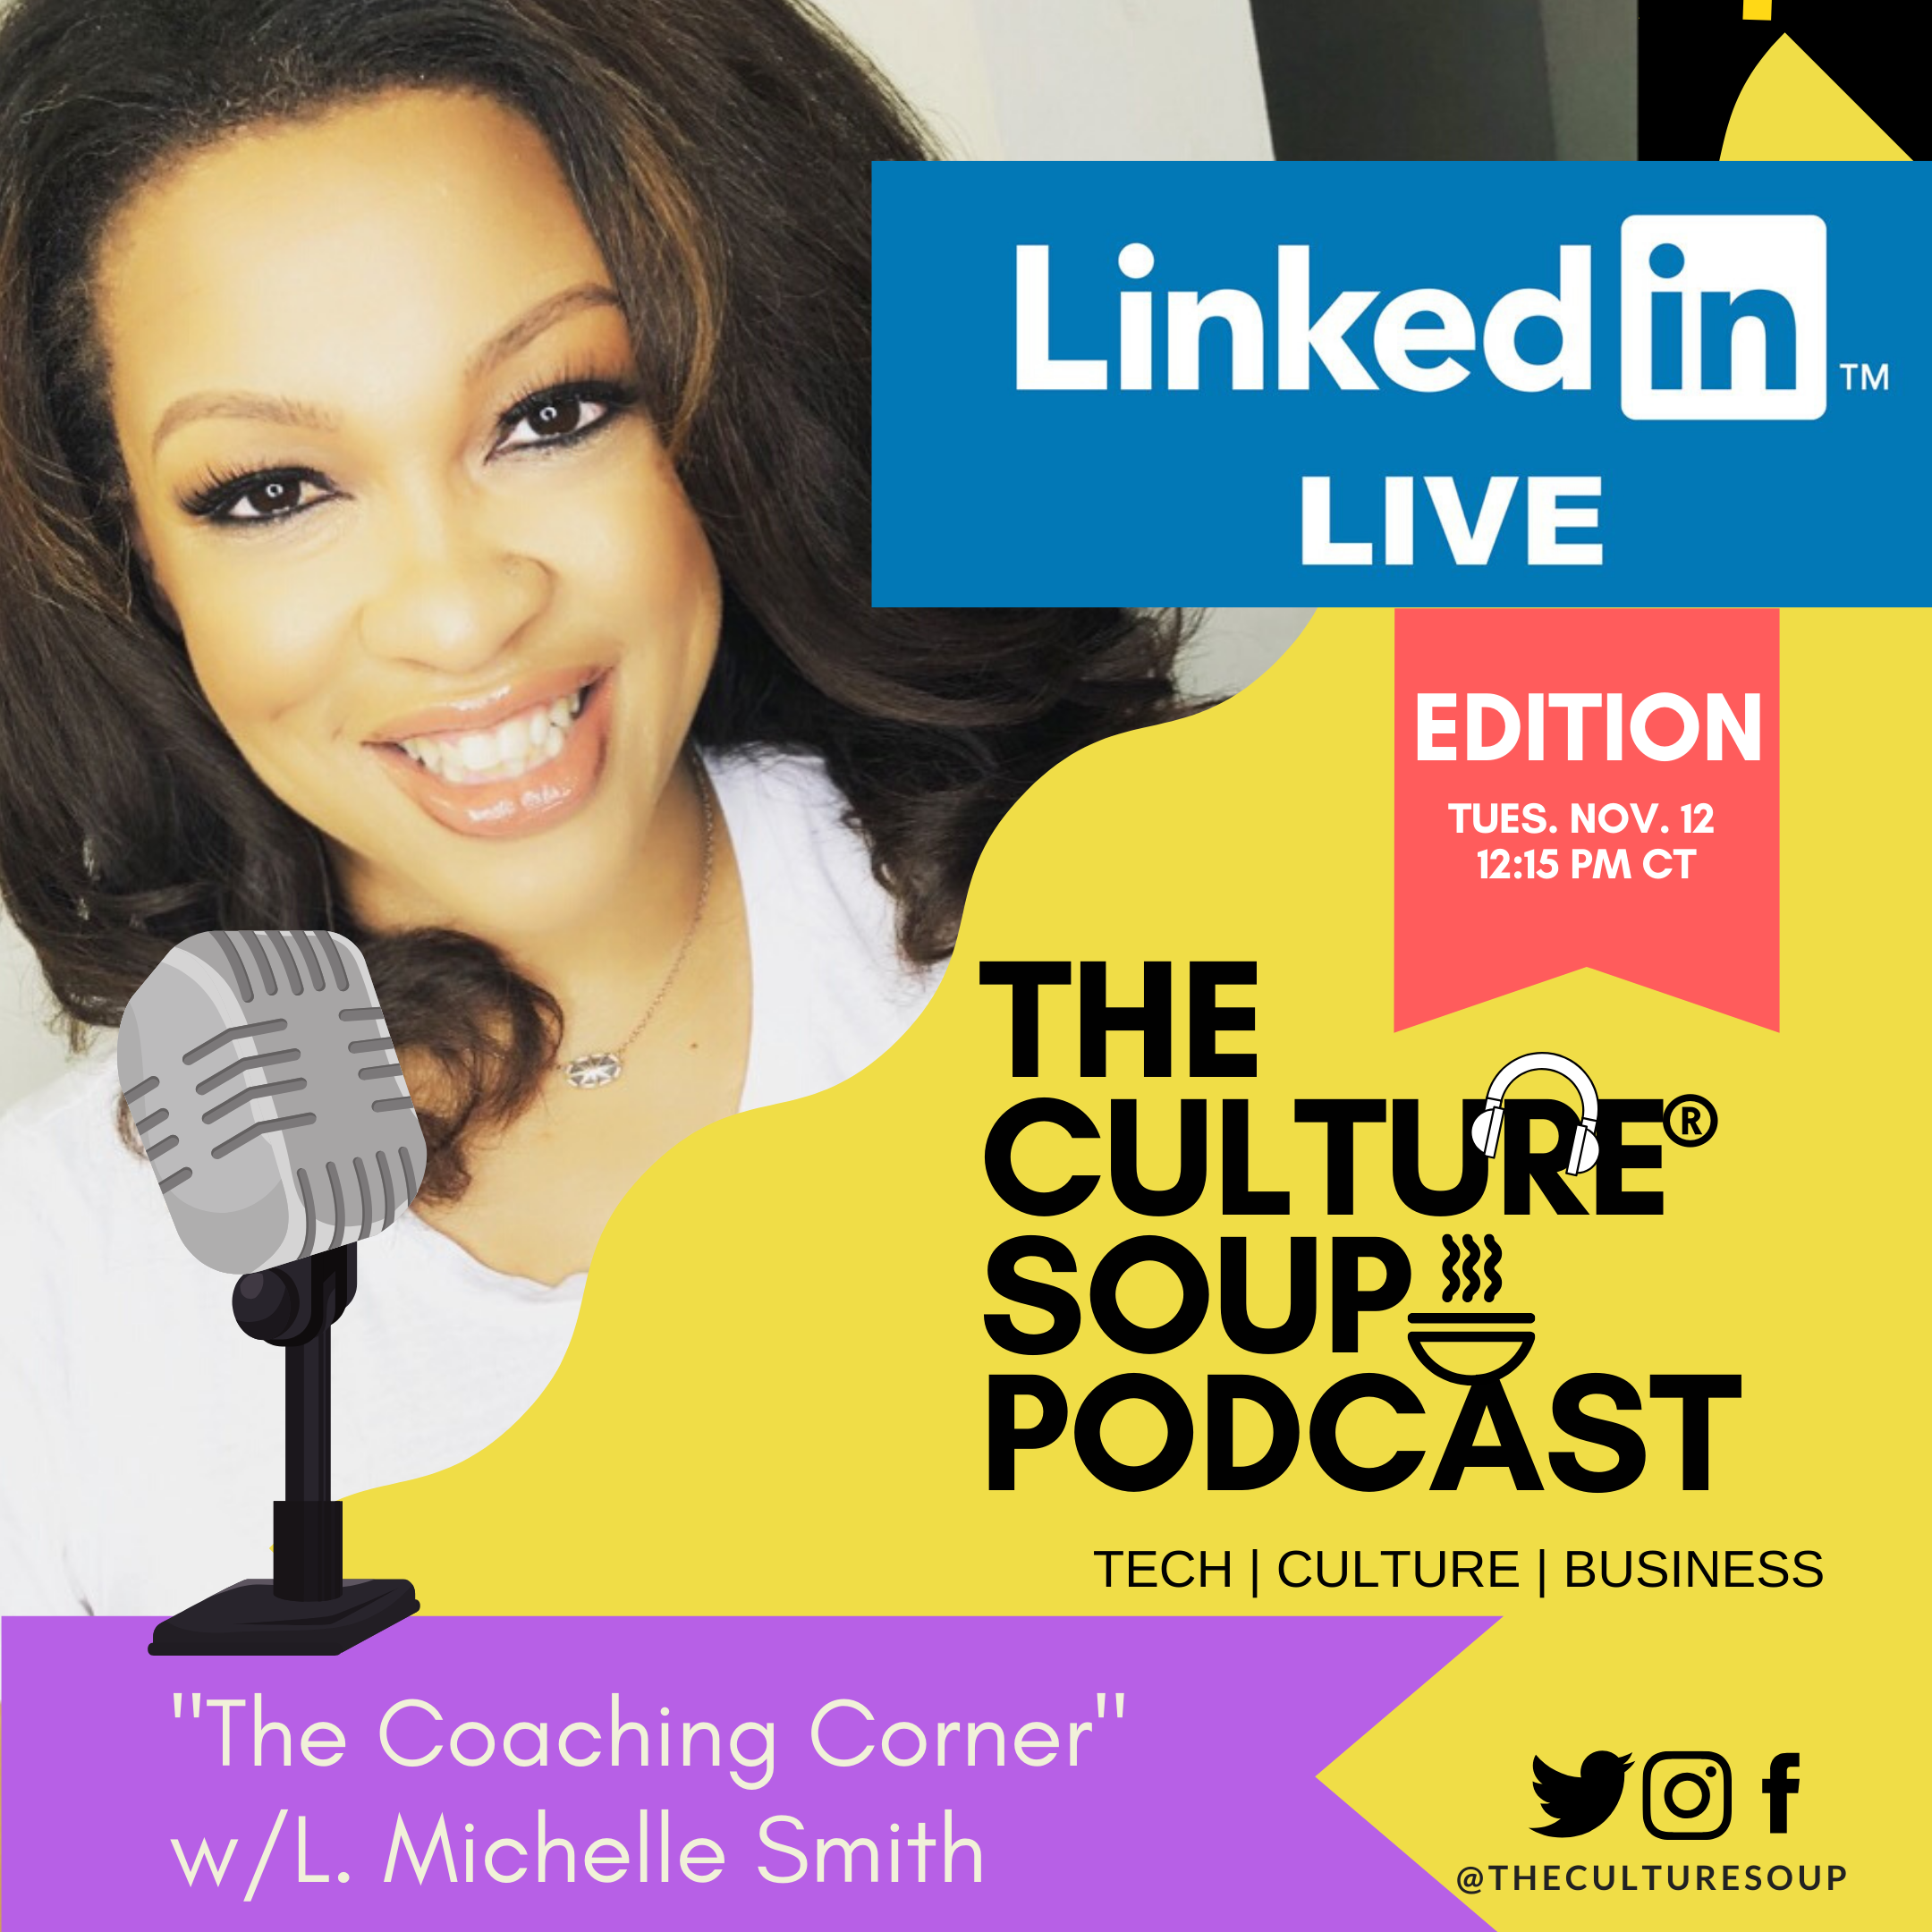 EP 68: The Coaching Corner on #LinkedInLIVE: TRANSITIONS with Tristan Layfield